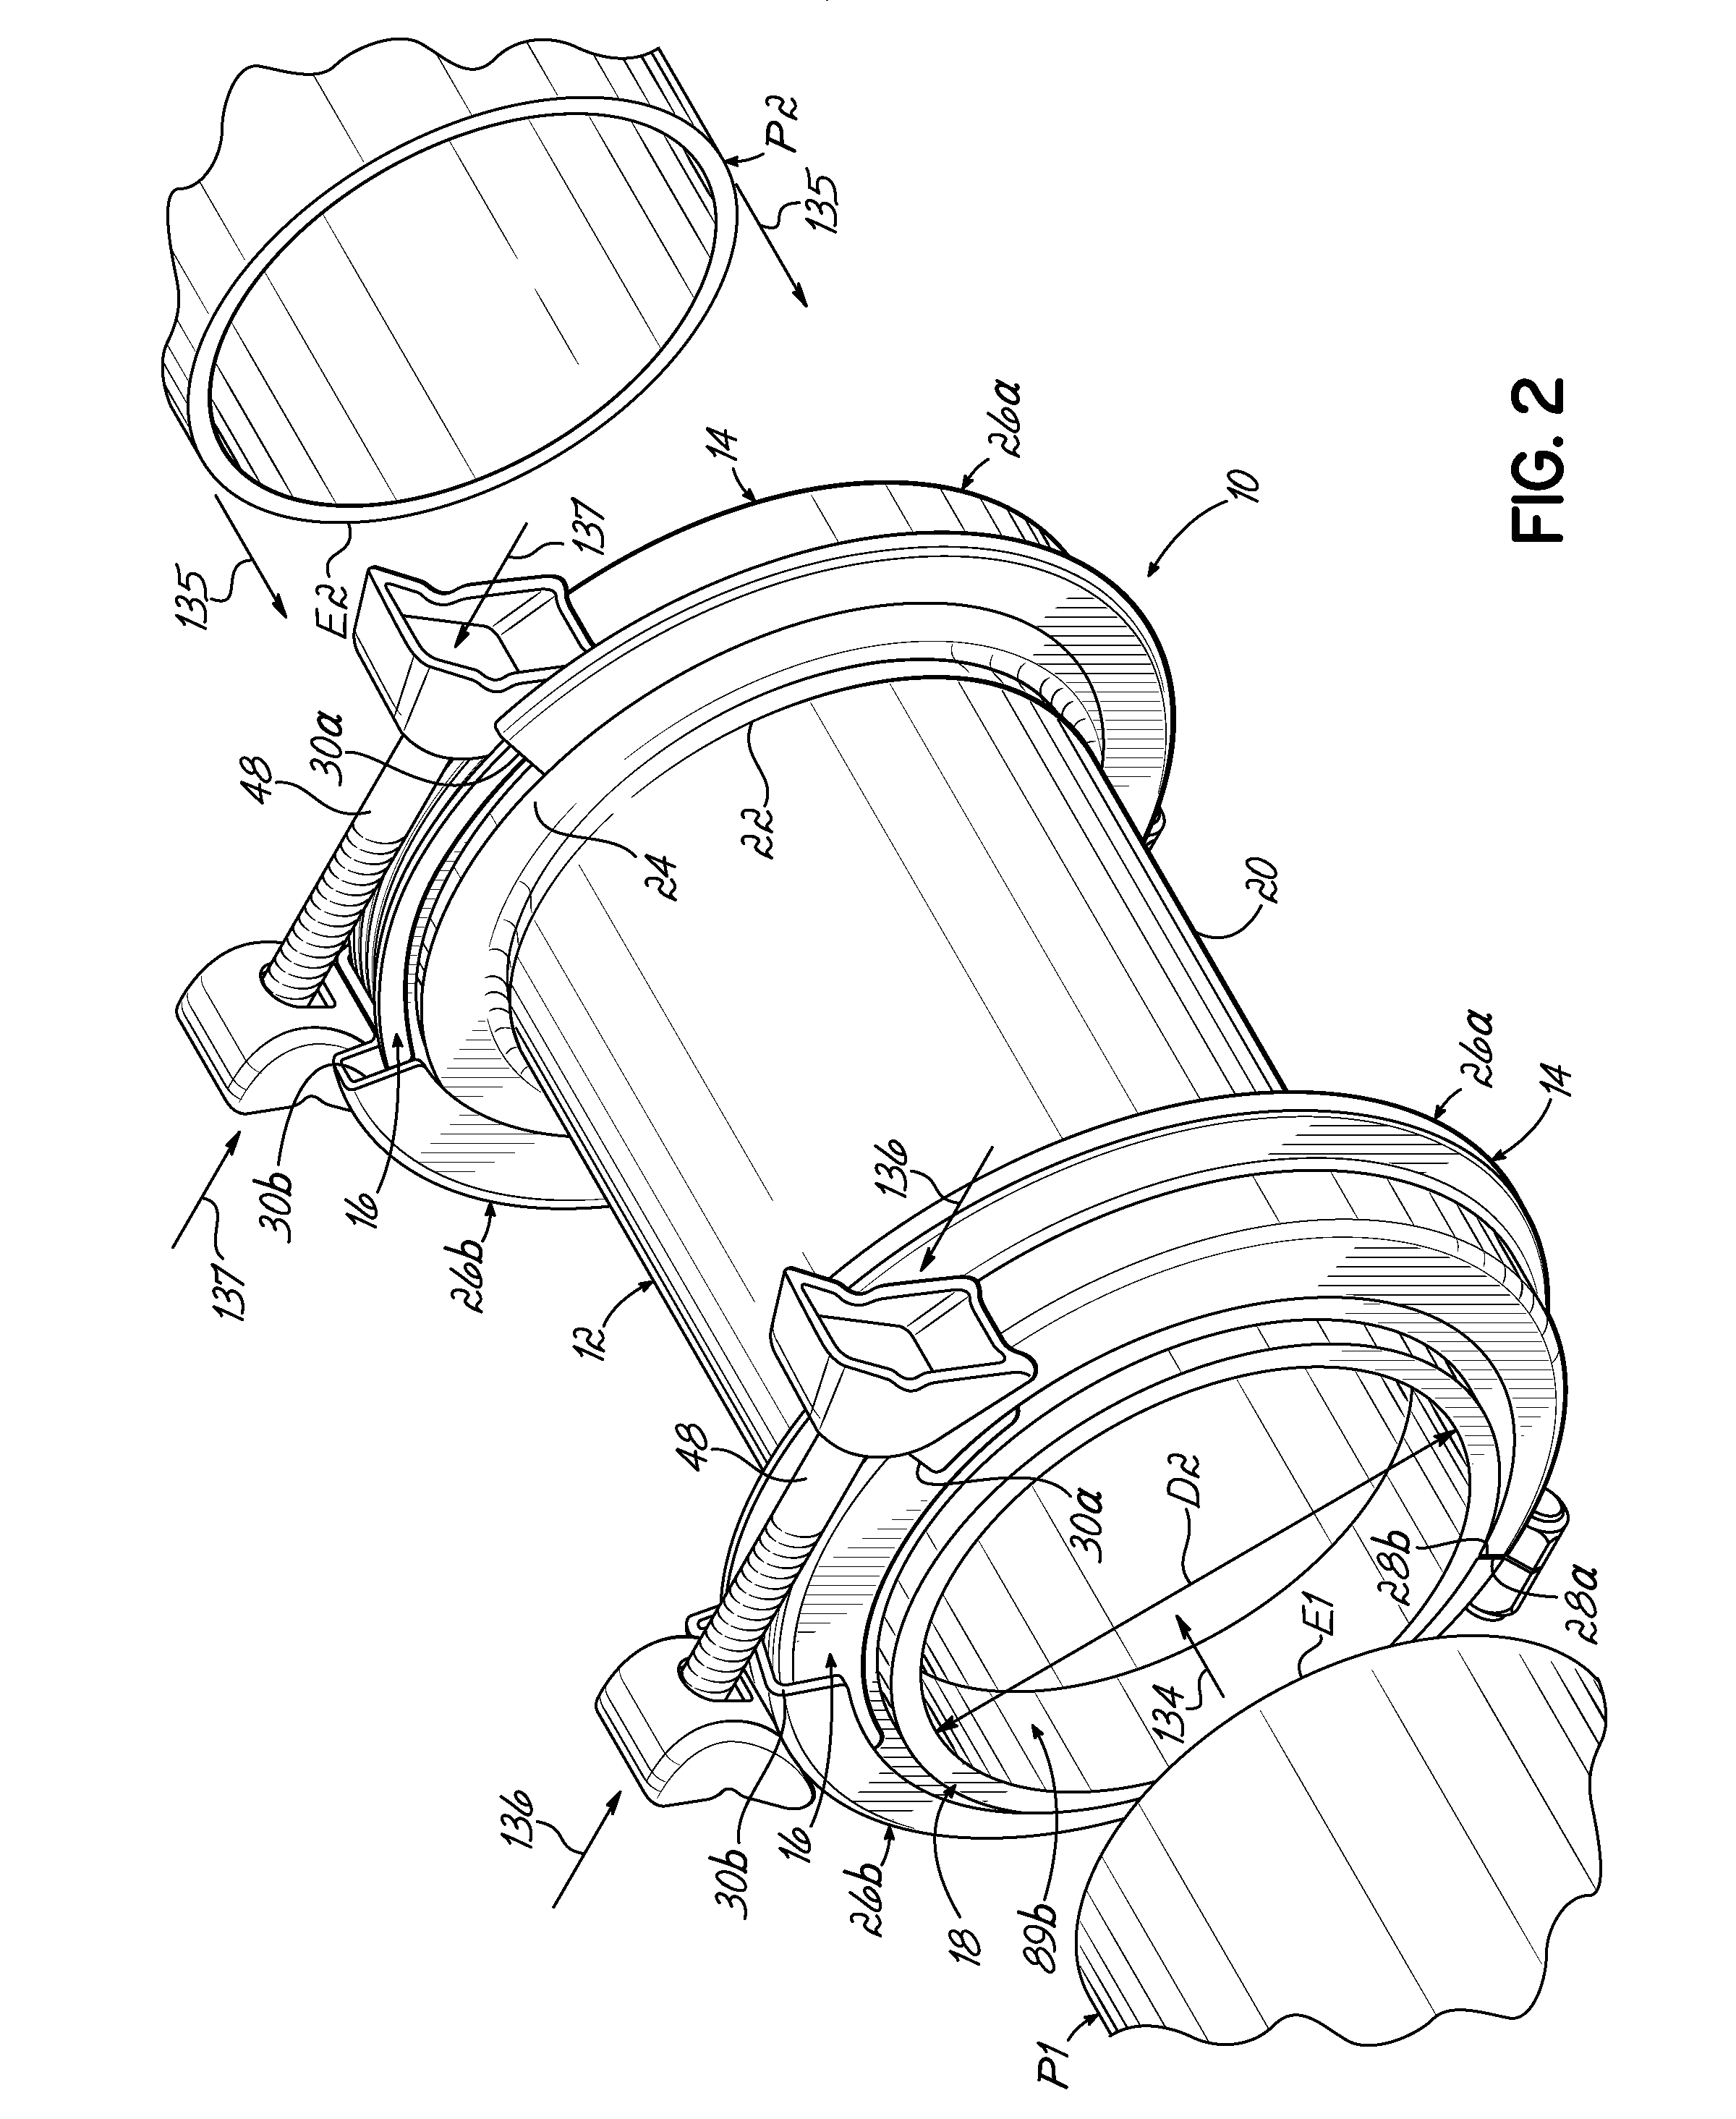 Split-ring gland pipe coupling with corrugated armor and annular gasket having pressure assist slot